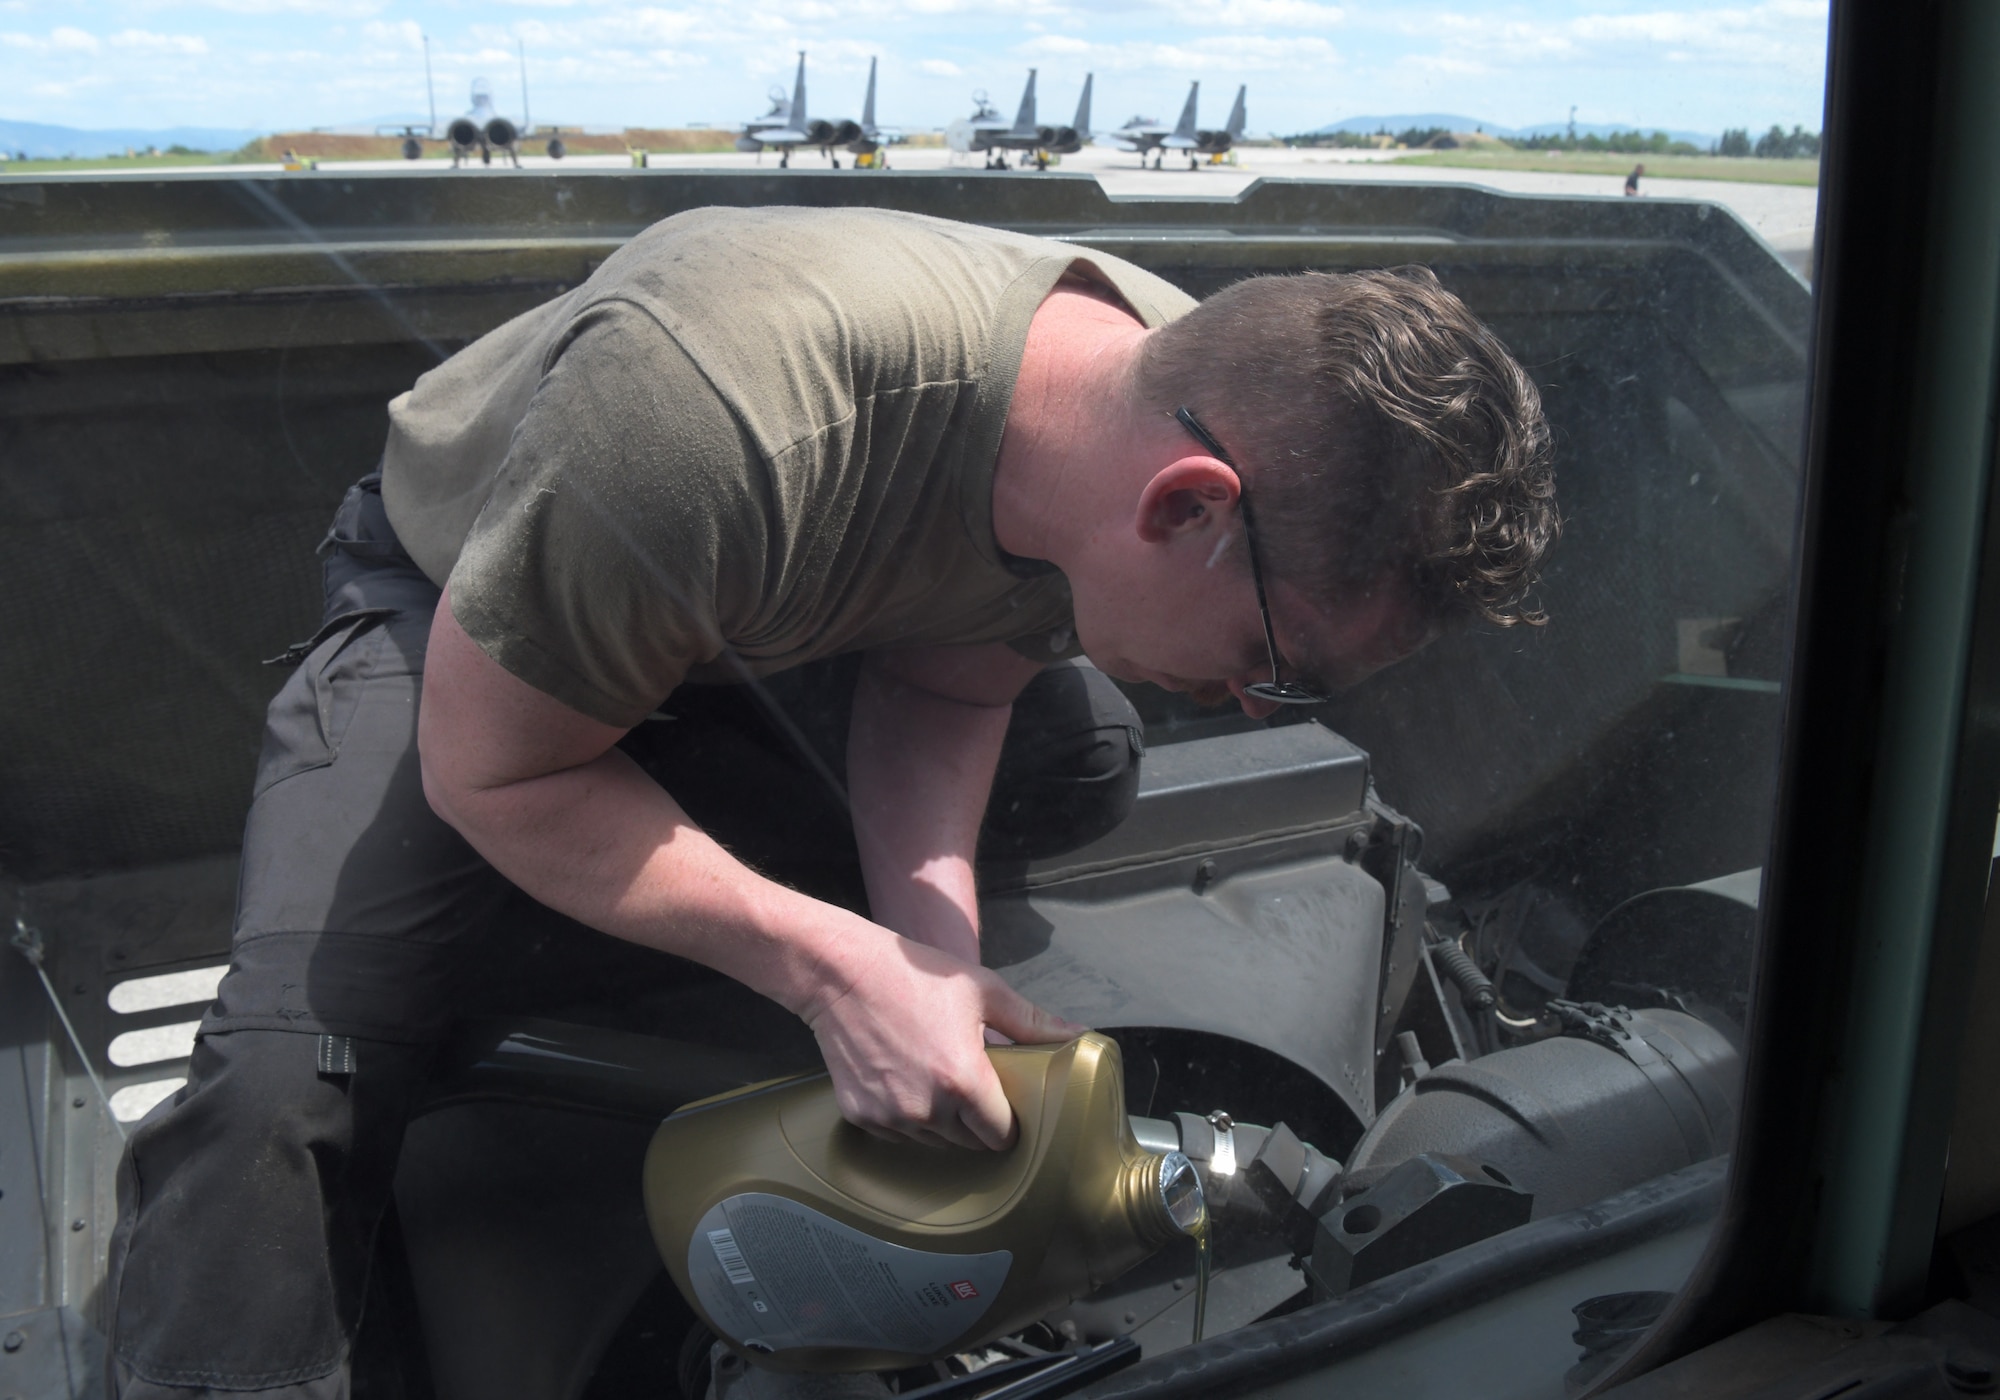 U.S. Air Force Staff Sgt. Kevin Grimm, 48th Logistics Readiness Squadron vehicle maintenance craftsman, tops off the oil on a refueling truck during exercise Astral Knight 21 at Larissa Air Base, Greece, May 20, 2021. During Astral Knight 21, the Liberty Wing sharpened its ability to deploy capable, credible forces to operate from strategic locations, which is enabled by strong regional partnerships critical for a rapid united response to adversaries around the world. (U.S. Air Force photo by Tech. Sgt. Alex Fox Echols III)